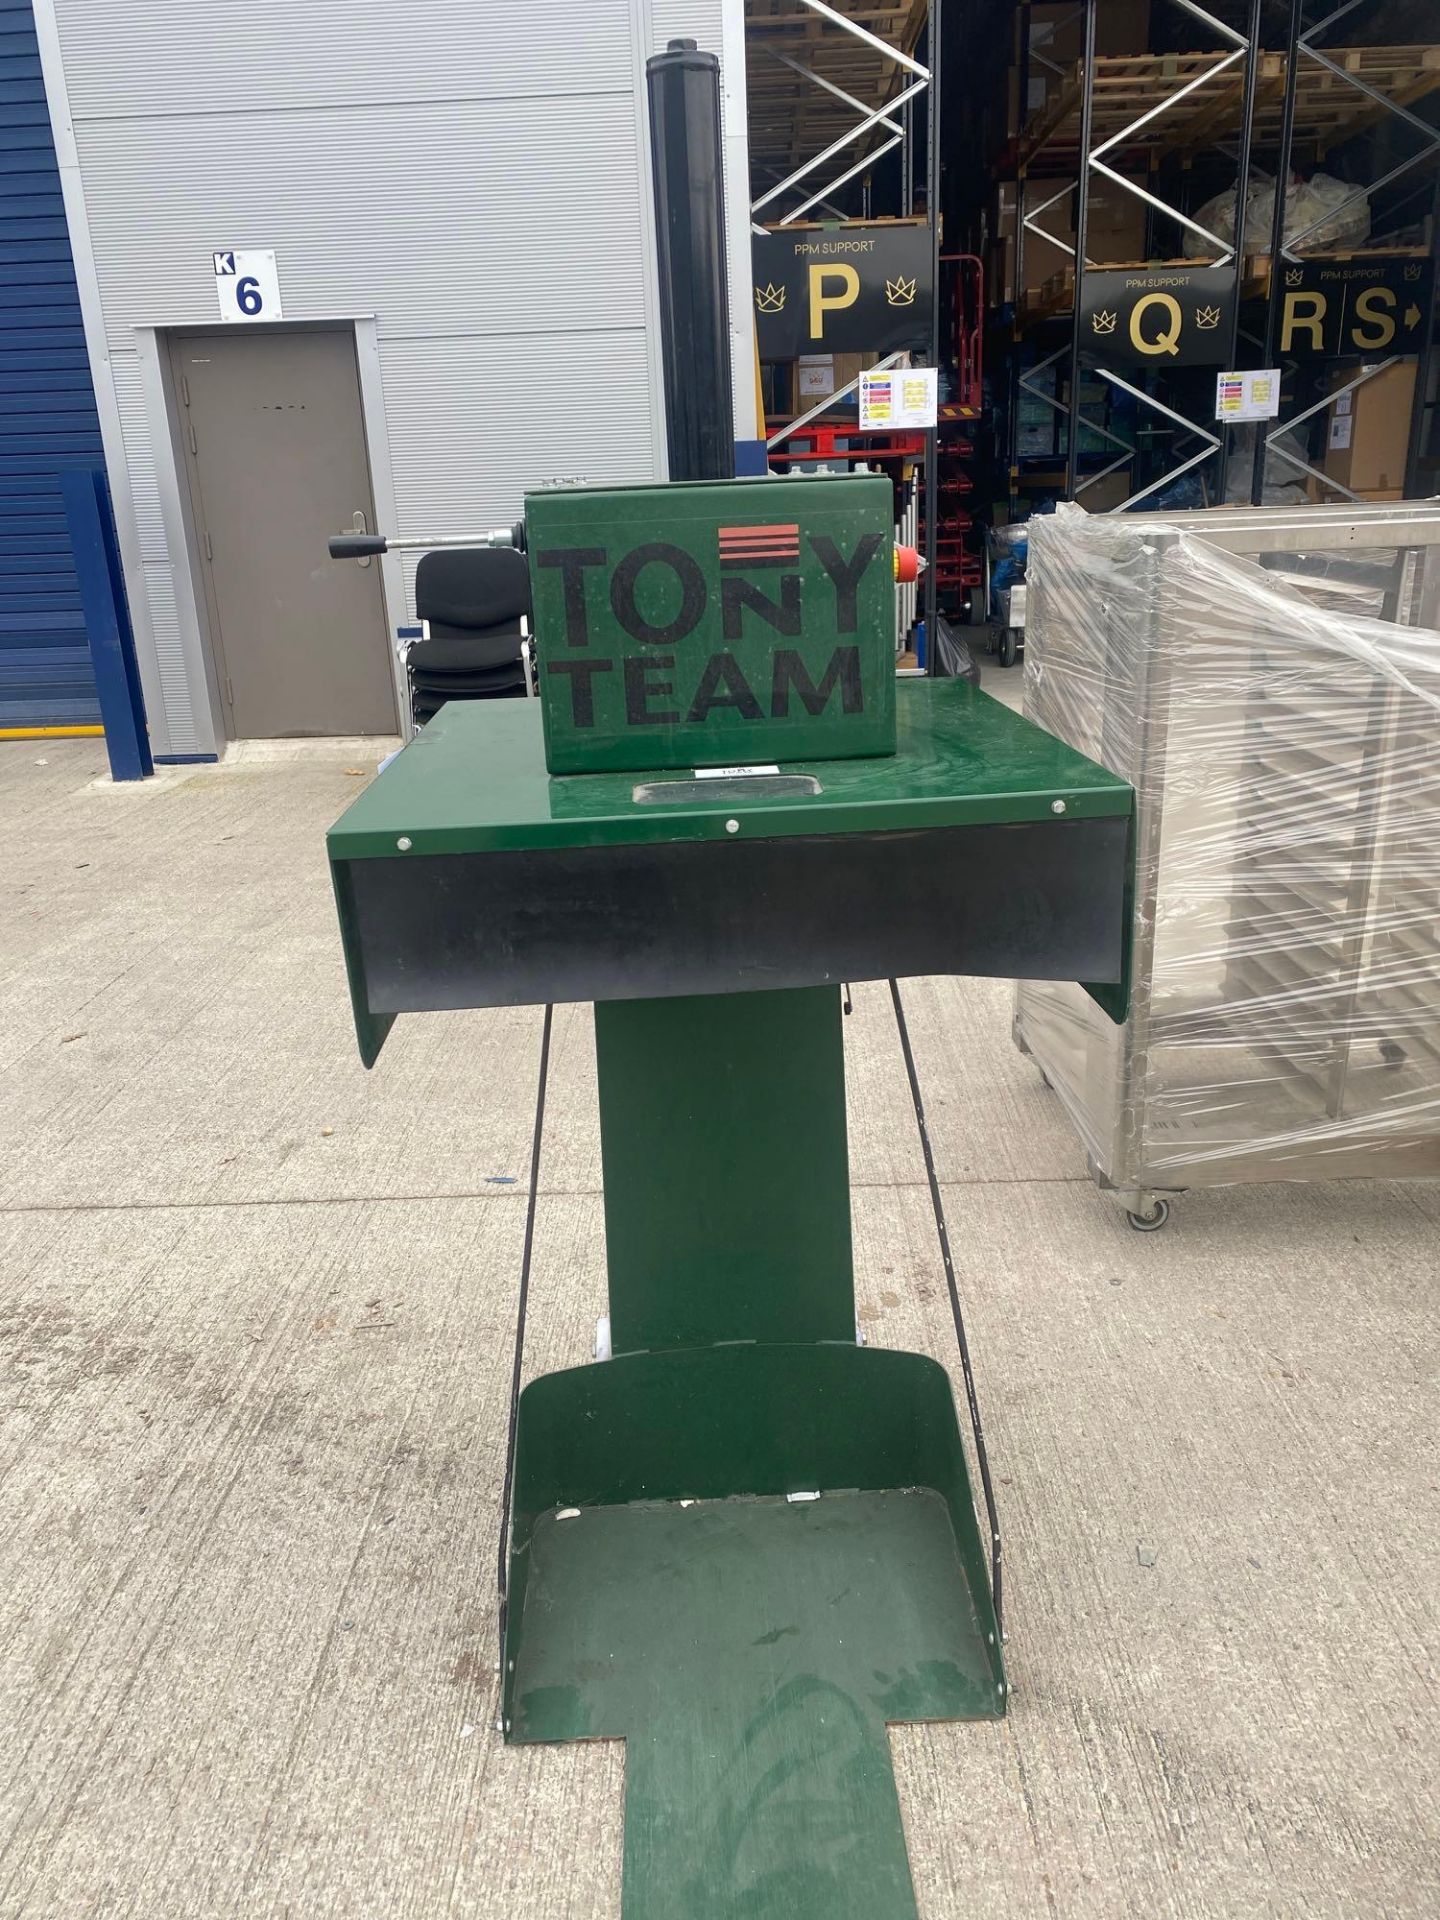 Tony Team Bin Compactor 20 / B178 The Tony Team 240Lt Bin Compactor Is Simple And Safe To Use And - Bild 3 aus 3